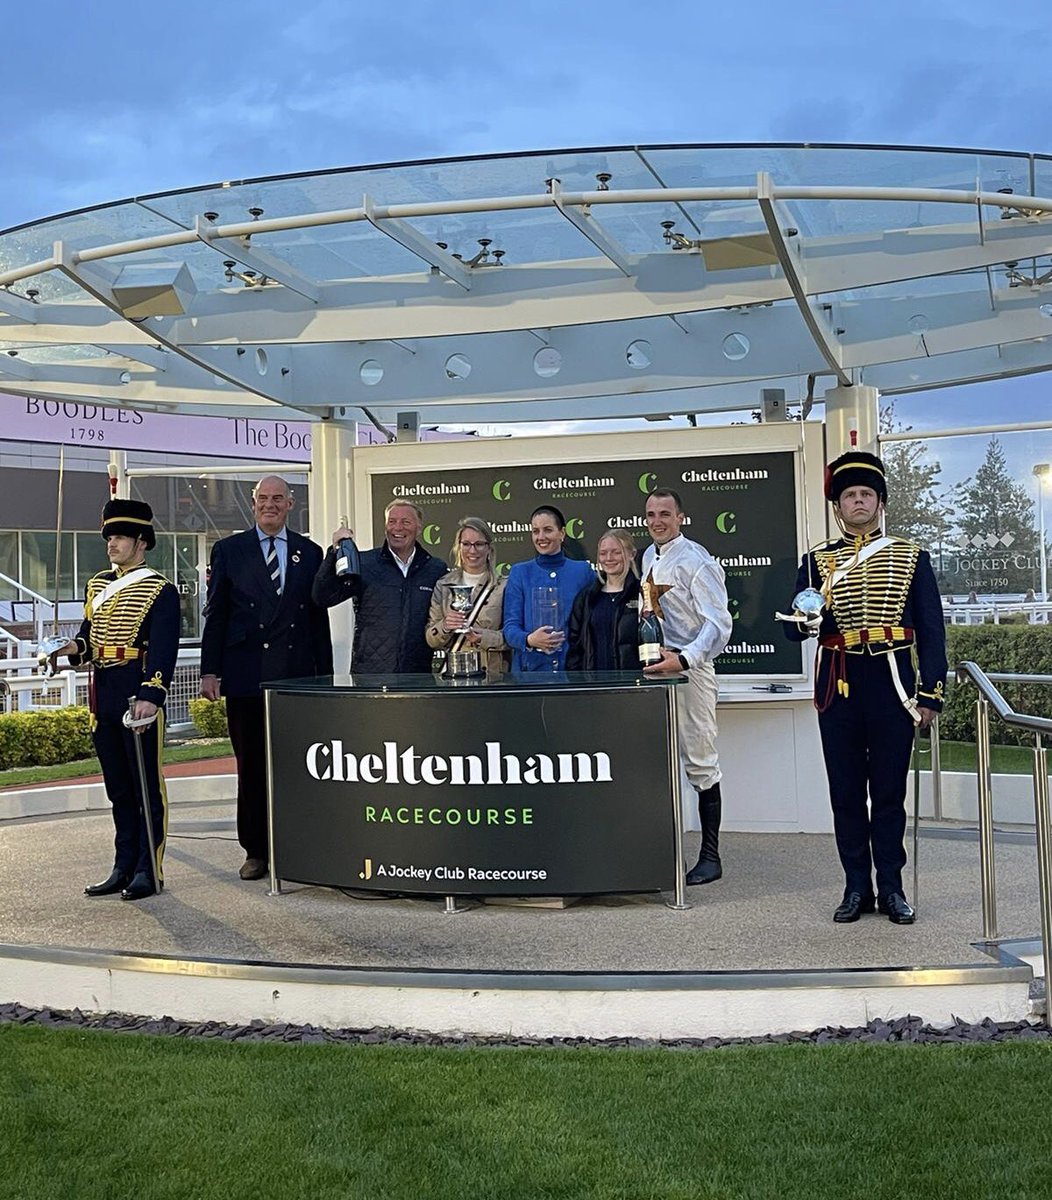 Many congratulations to Paloma Blue which won the RGH Open Steeple Chase at Cheltenham Racecourse. The Owner, Trainer and Jockey were presented with the RGH Cup. The Sword Orderlies were from C(RGH) Squadron RWxY in Cirencester. @WessexYeomanry @RoyalArmdCorps @CheltenhamRaces